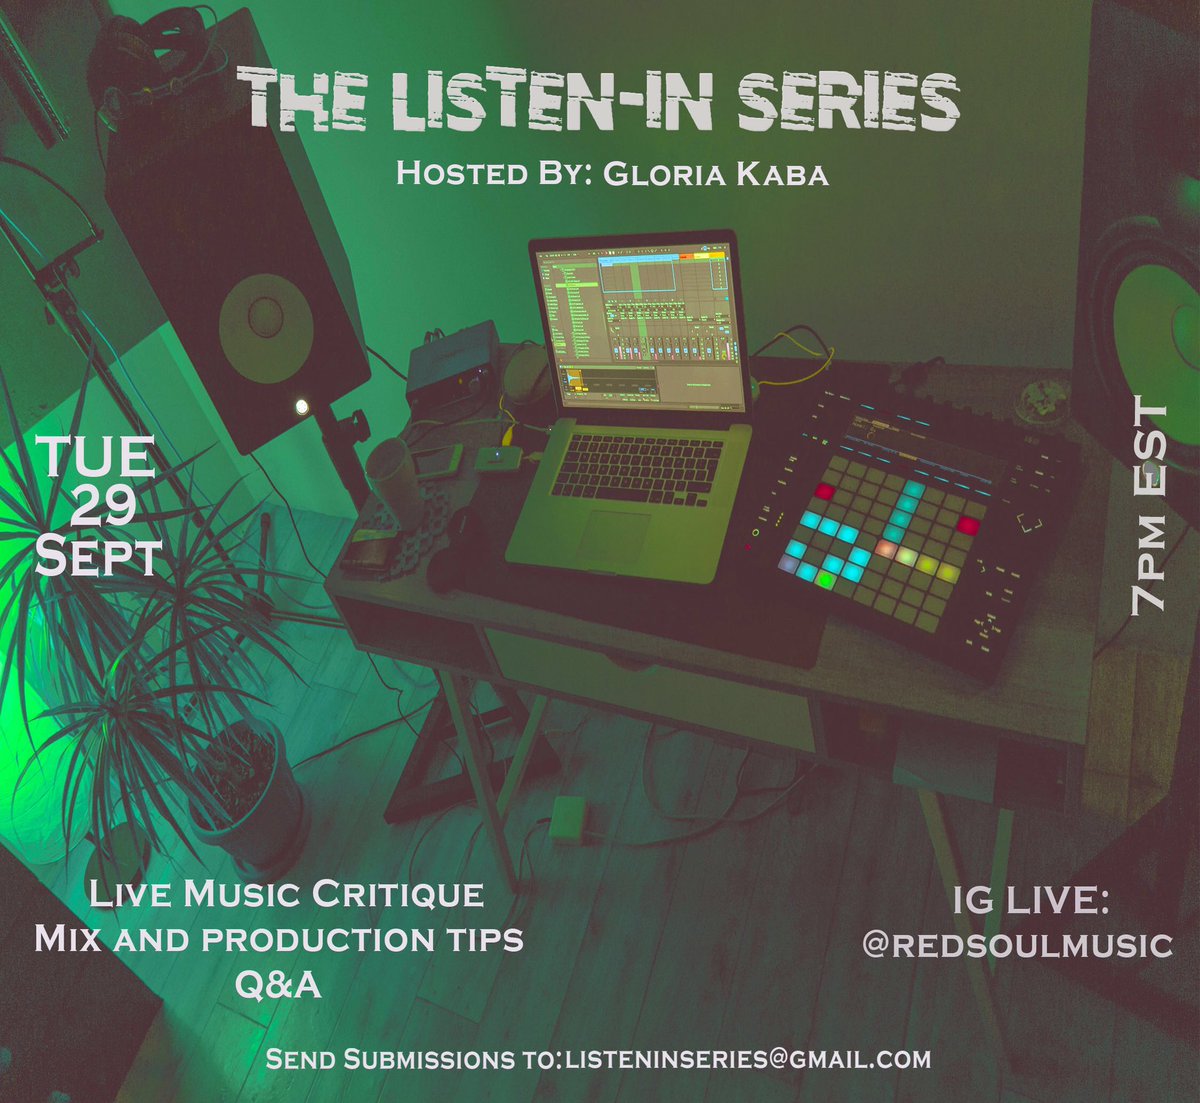 Join me on Sept 29th at 7pm for the next installment of “Listen-In”. I will be giving live feedback on submitted music. All artists, producers, and songwriters are welcome to submit. Submissions should be sent to listeninseries@gmail.com. Include your IG handle in the email.